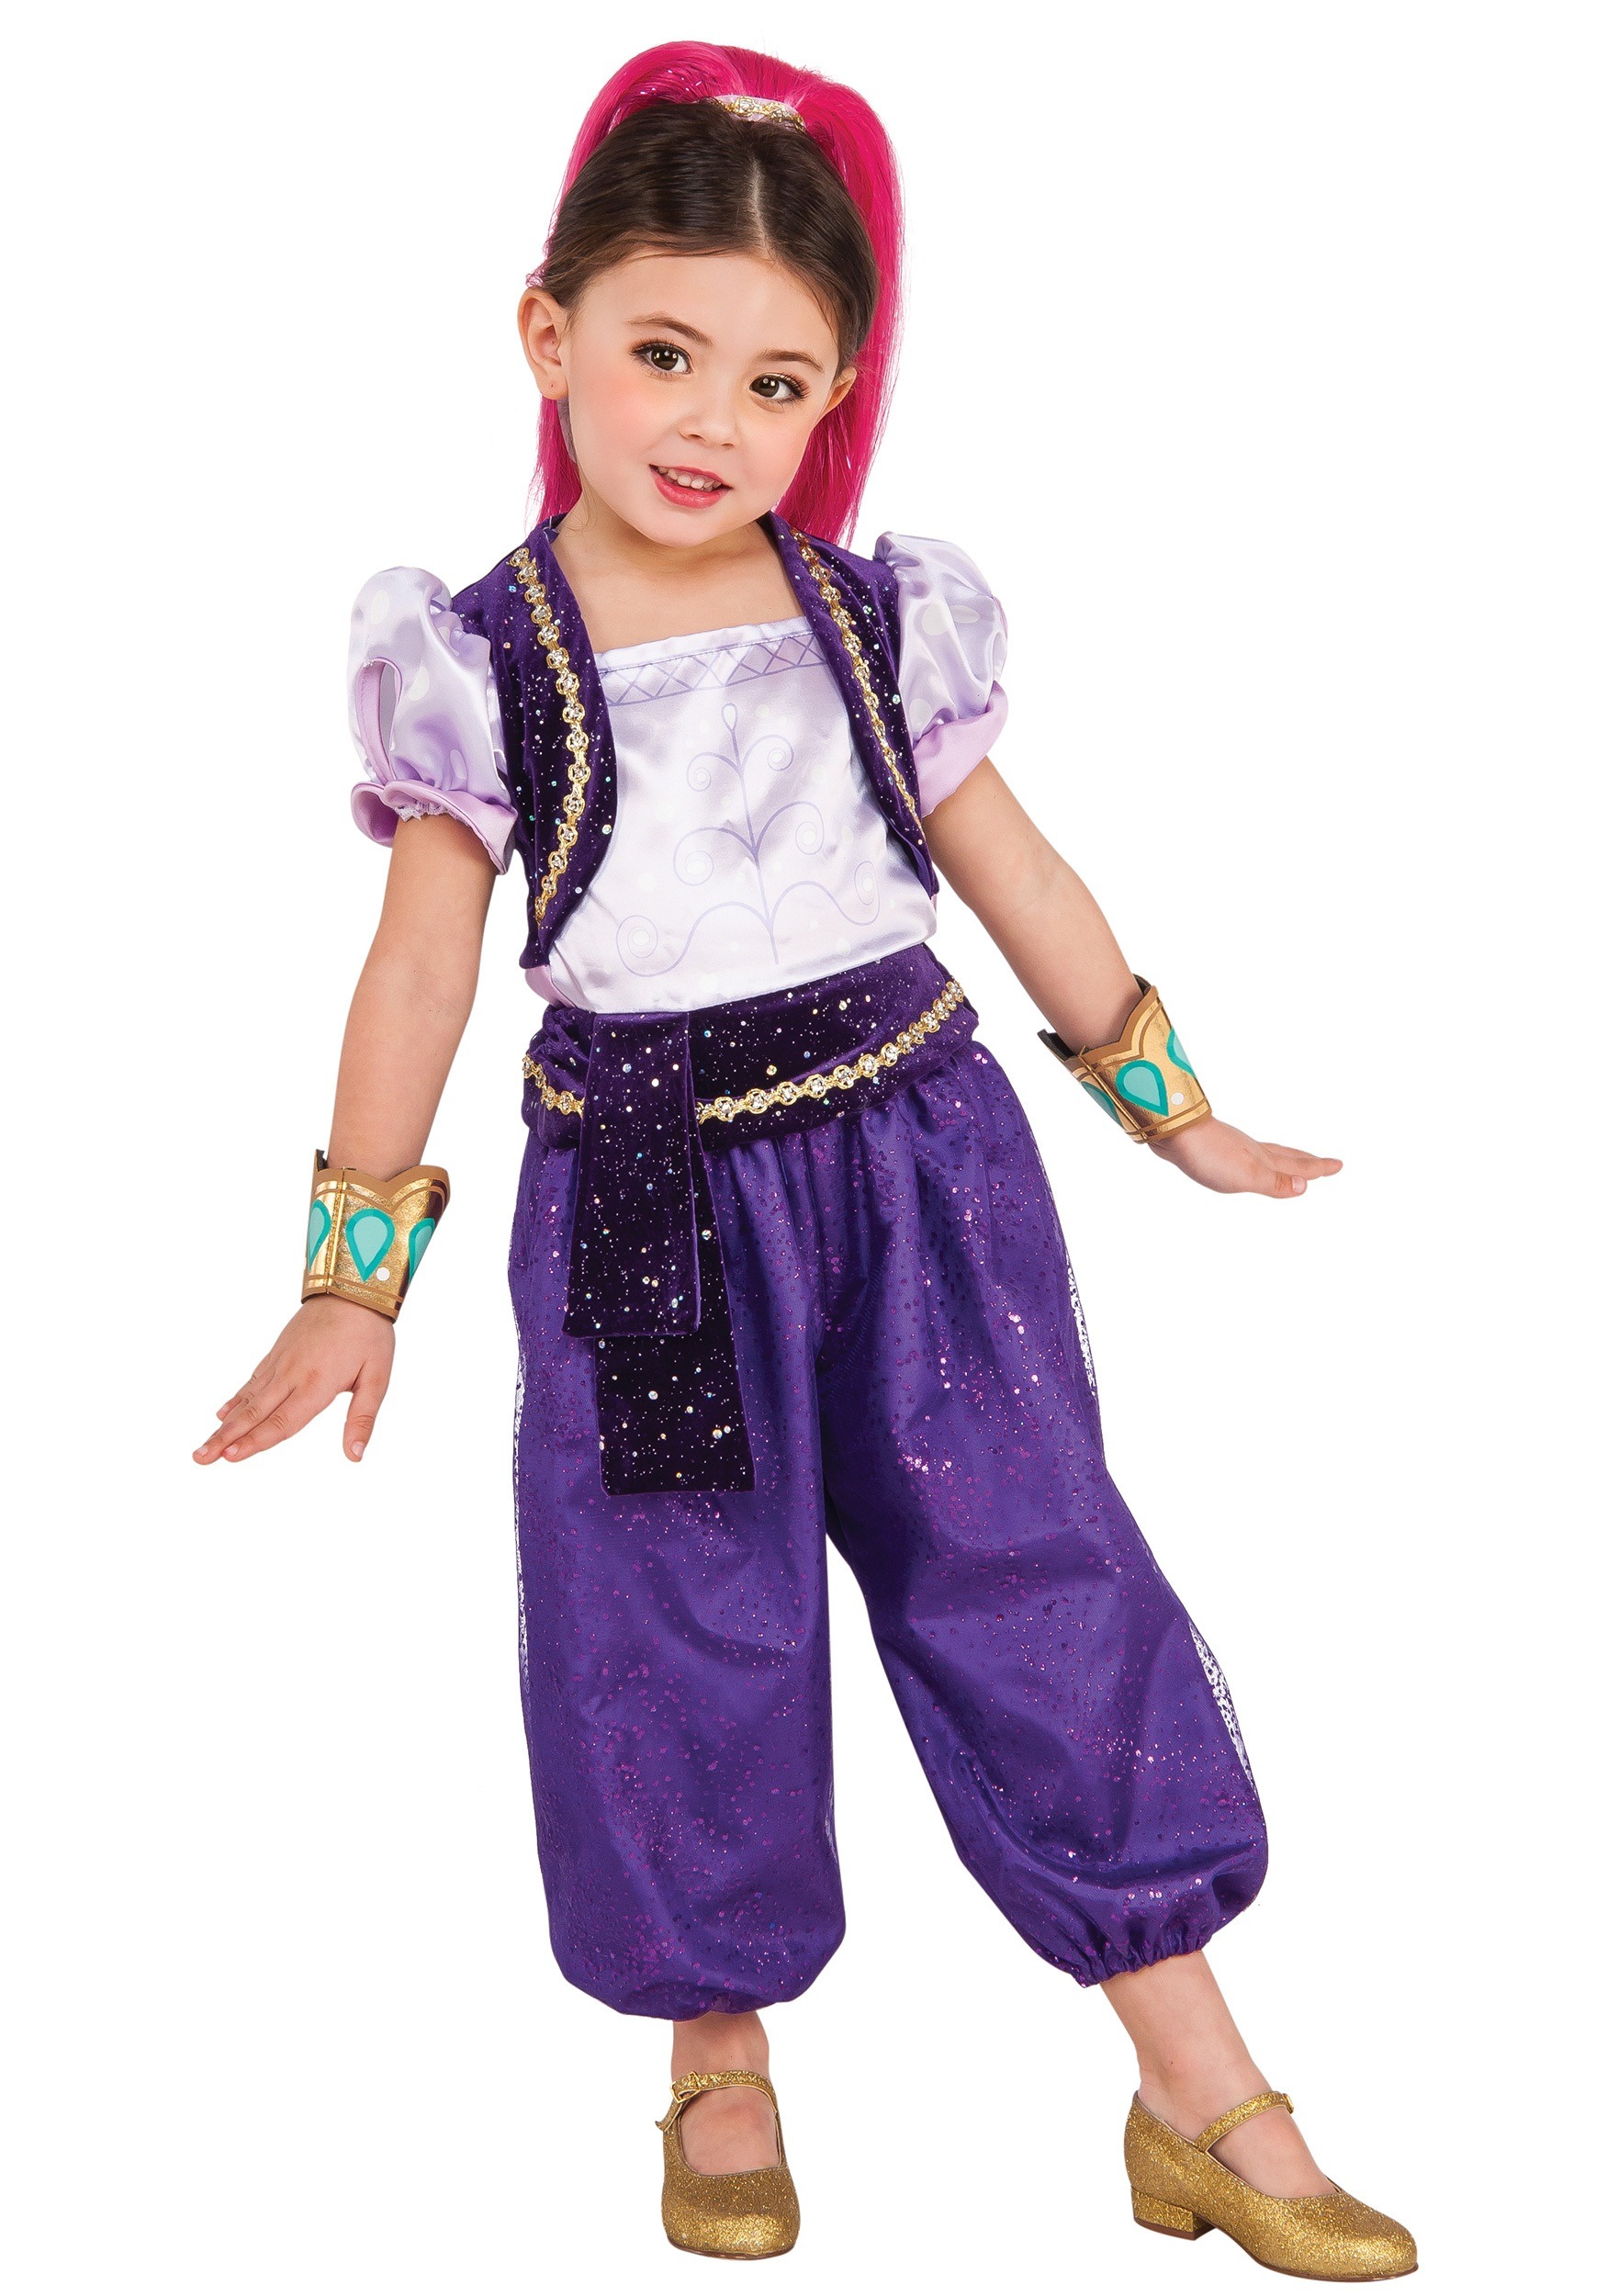 Girls Deluxe Shimmer Costume from Shimmer and Shine